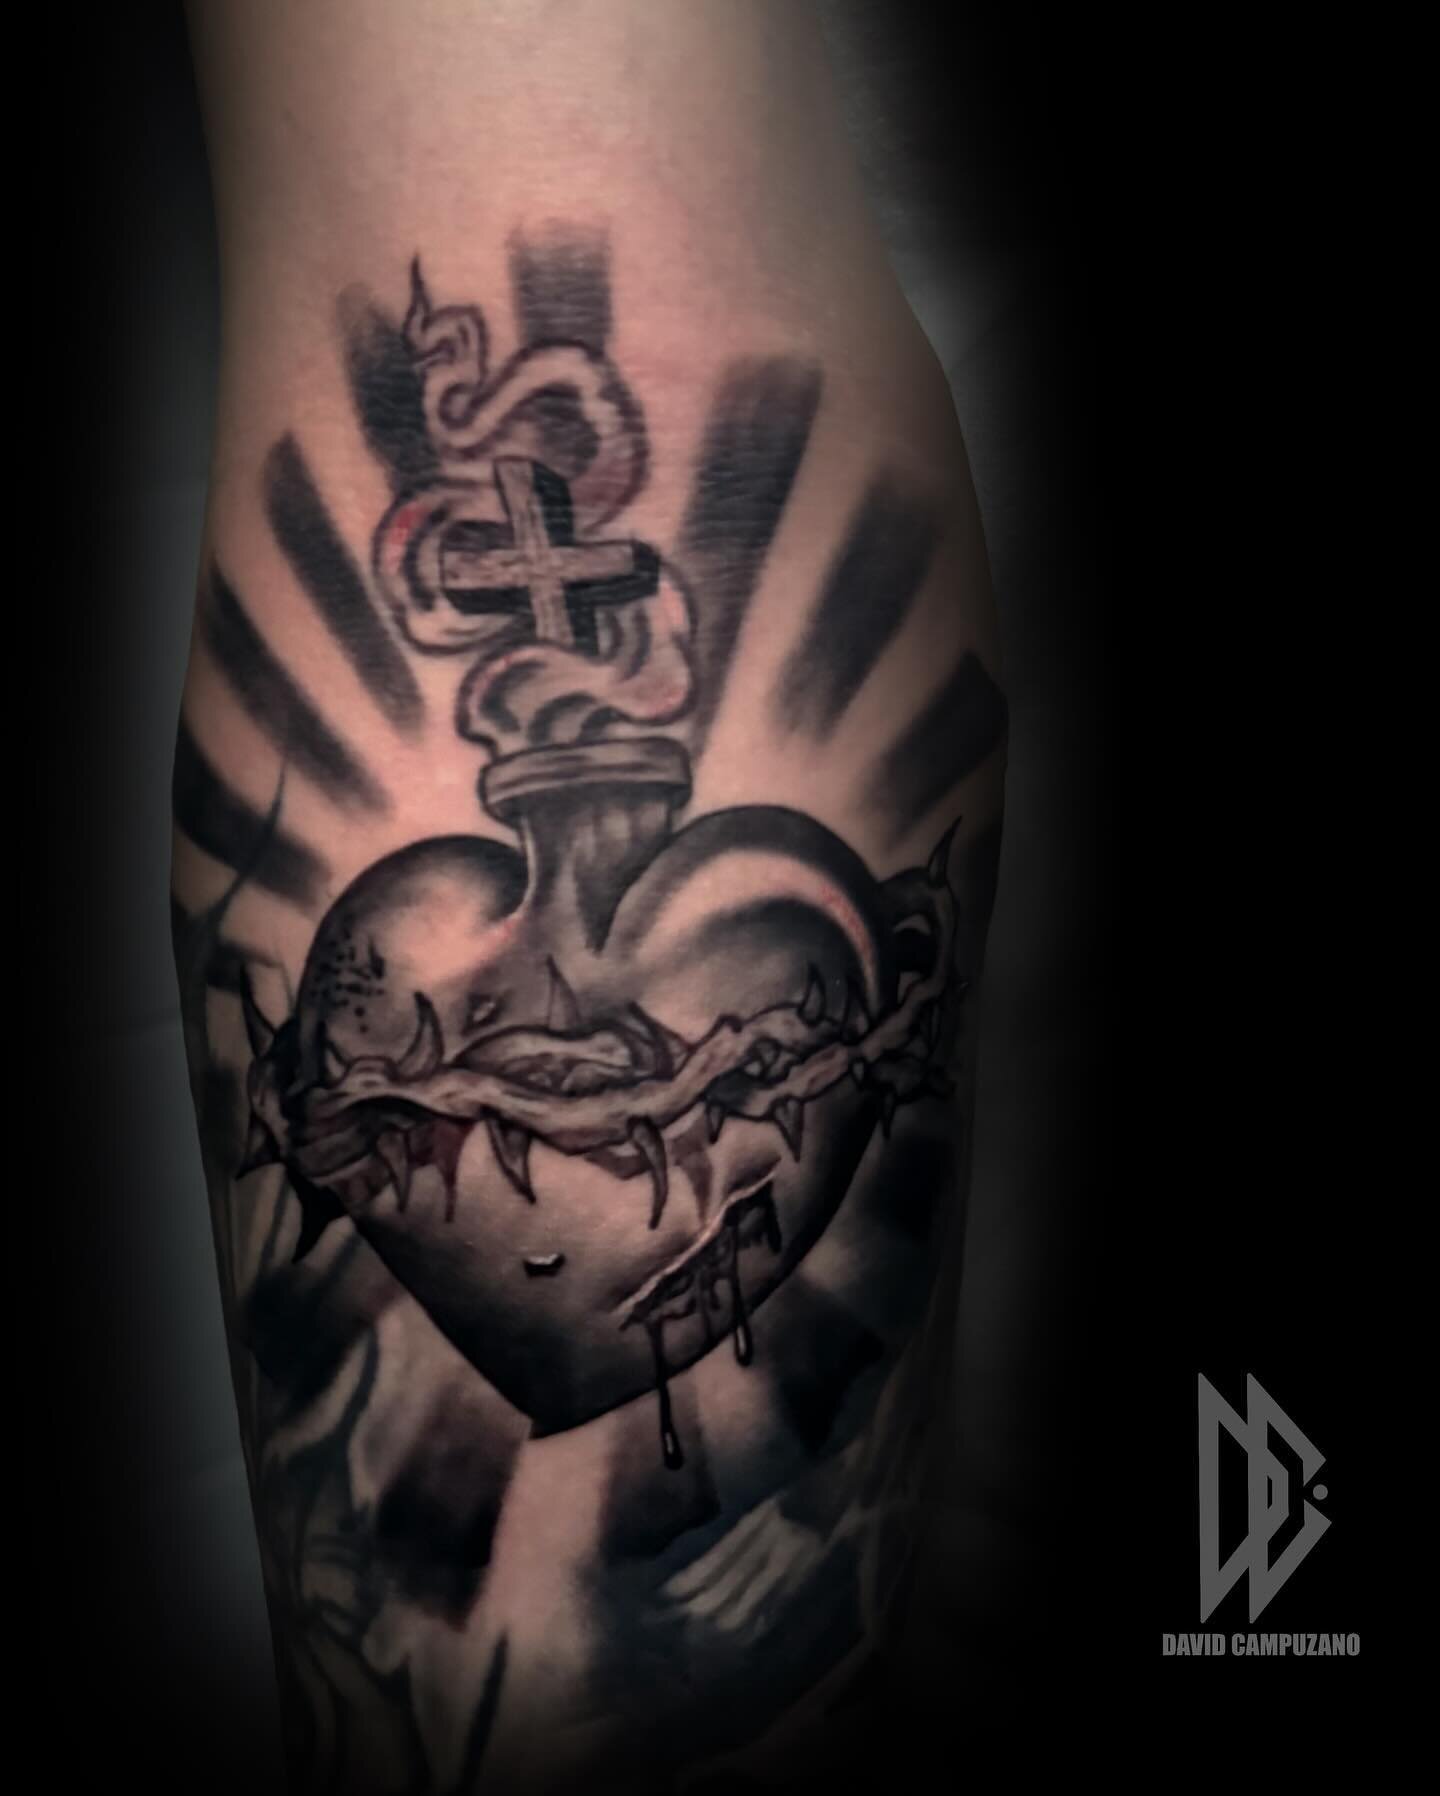 Sacred Heart @davidcampuzanotattoo did on his client, DM him to book your appointment